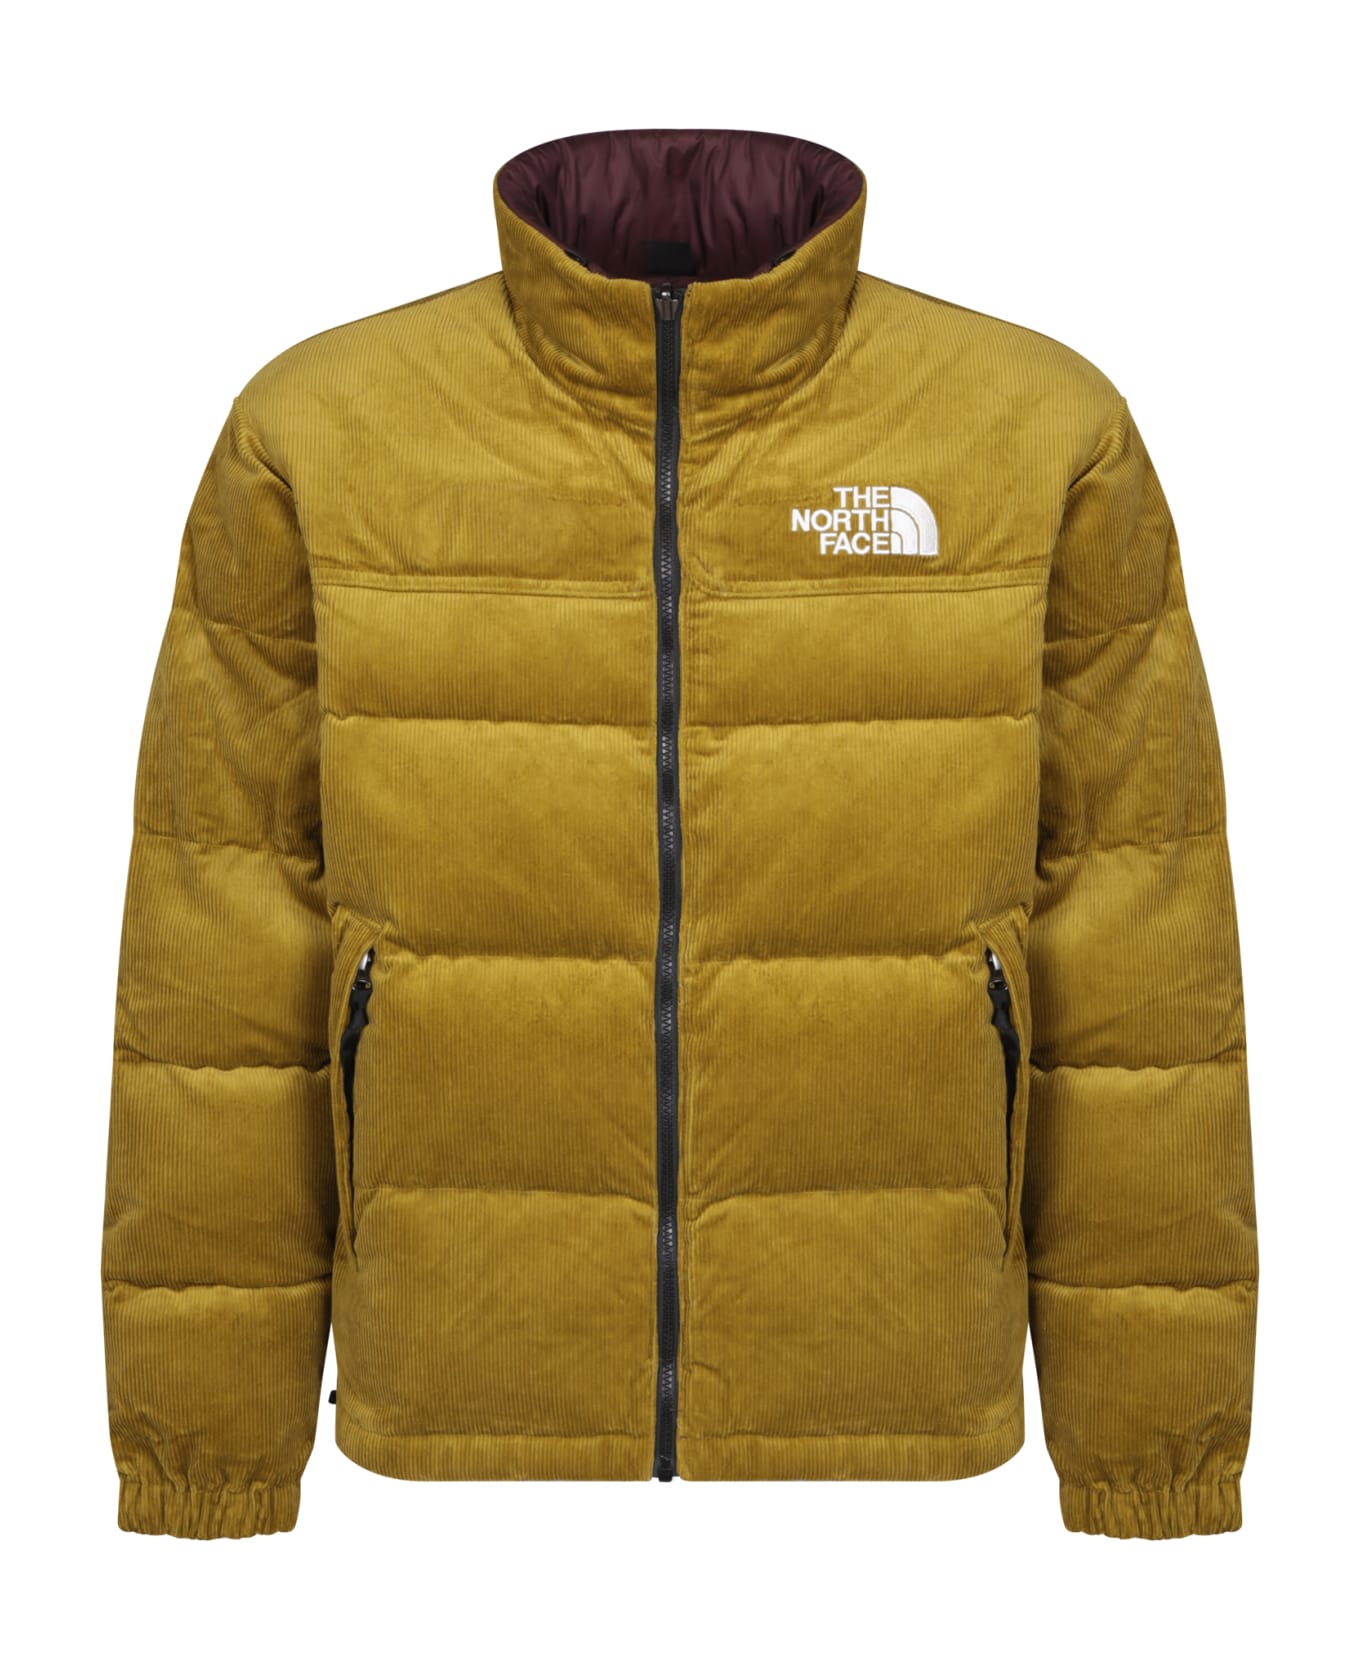 The North Face Reversible Green/bordeaux Jacket - Green